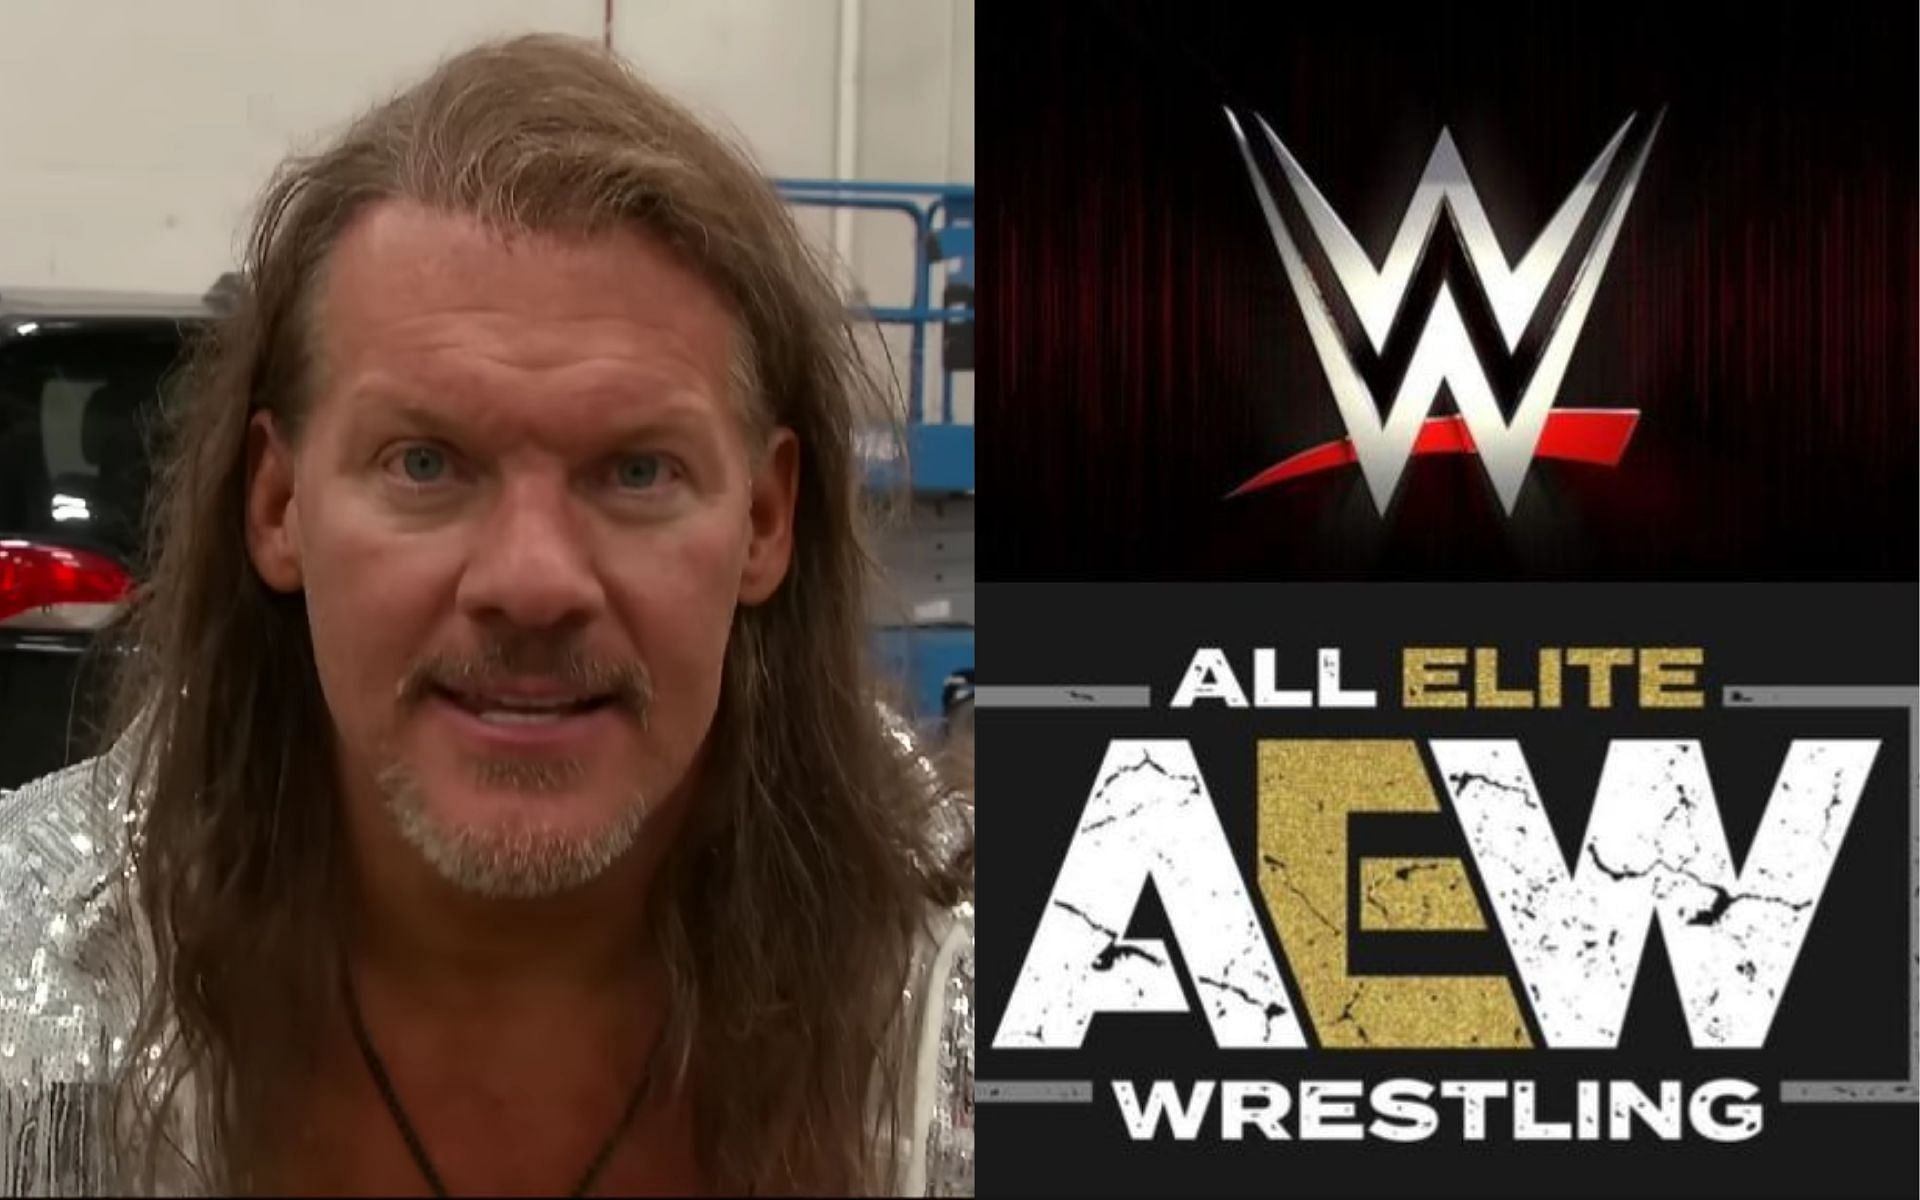 Chris Jericho (left) and AEW and WWE logos (right).